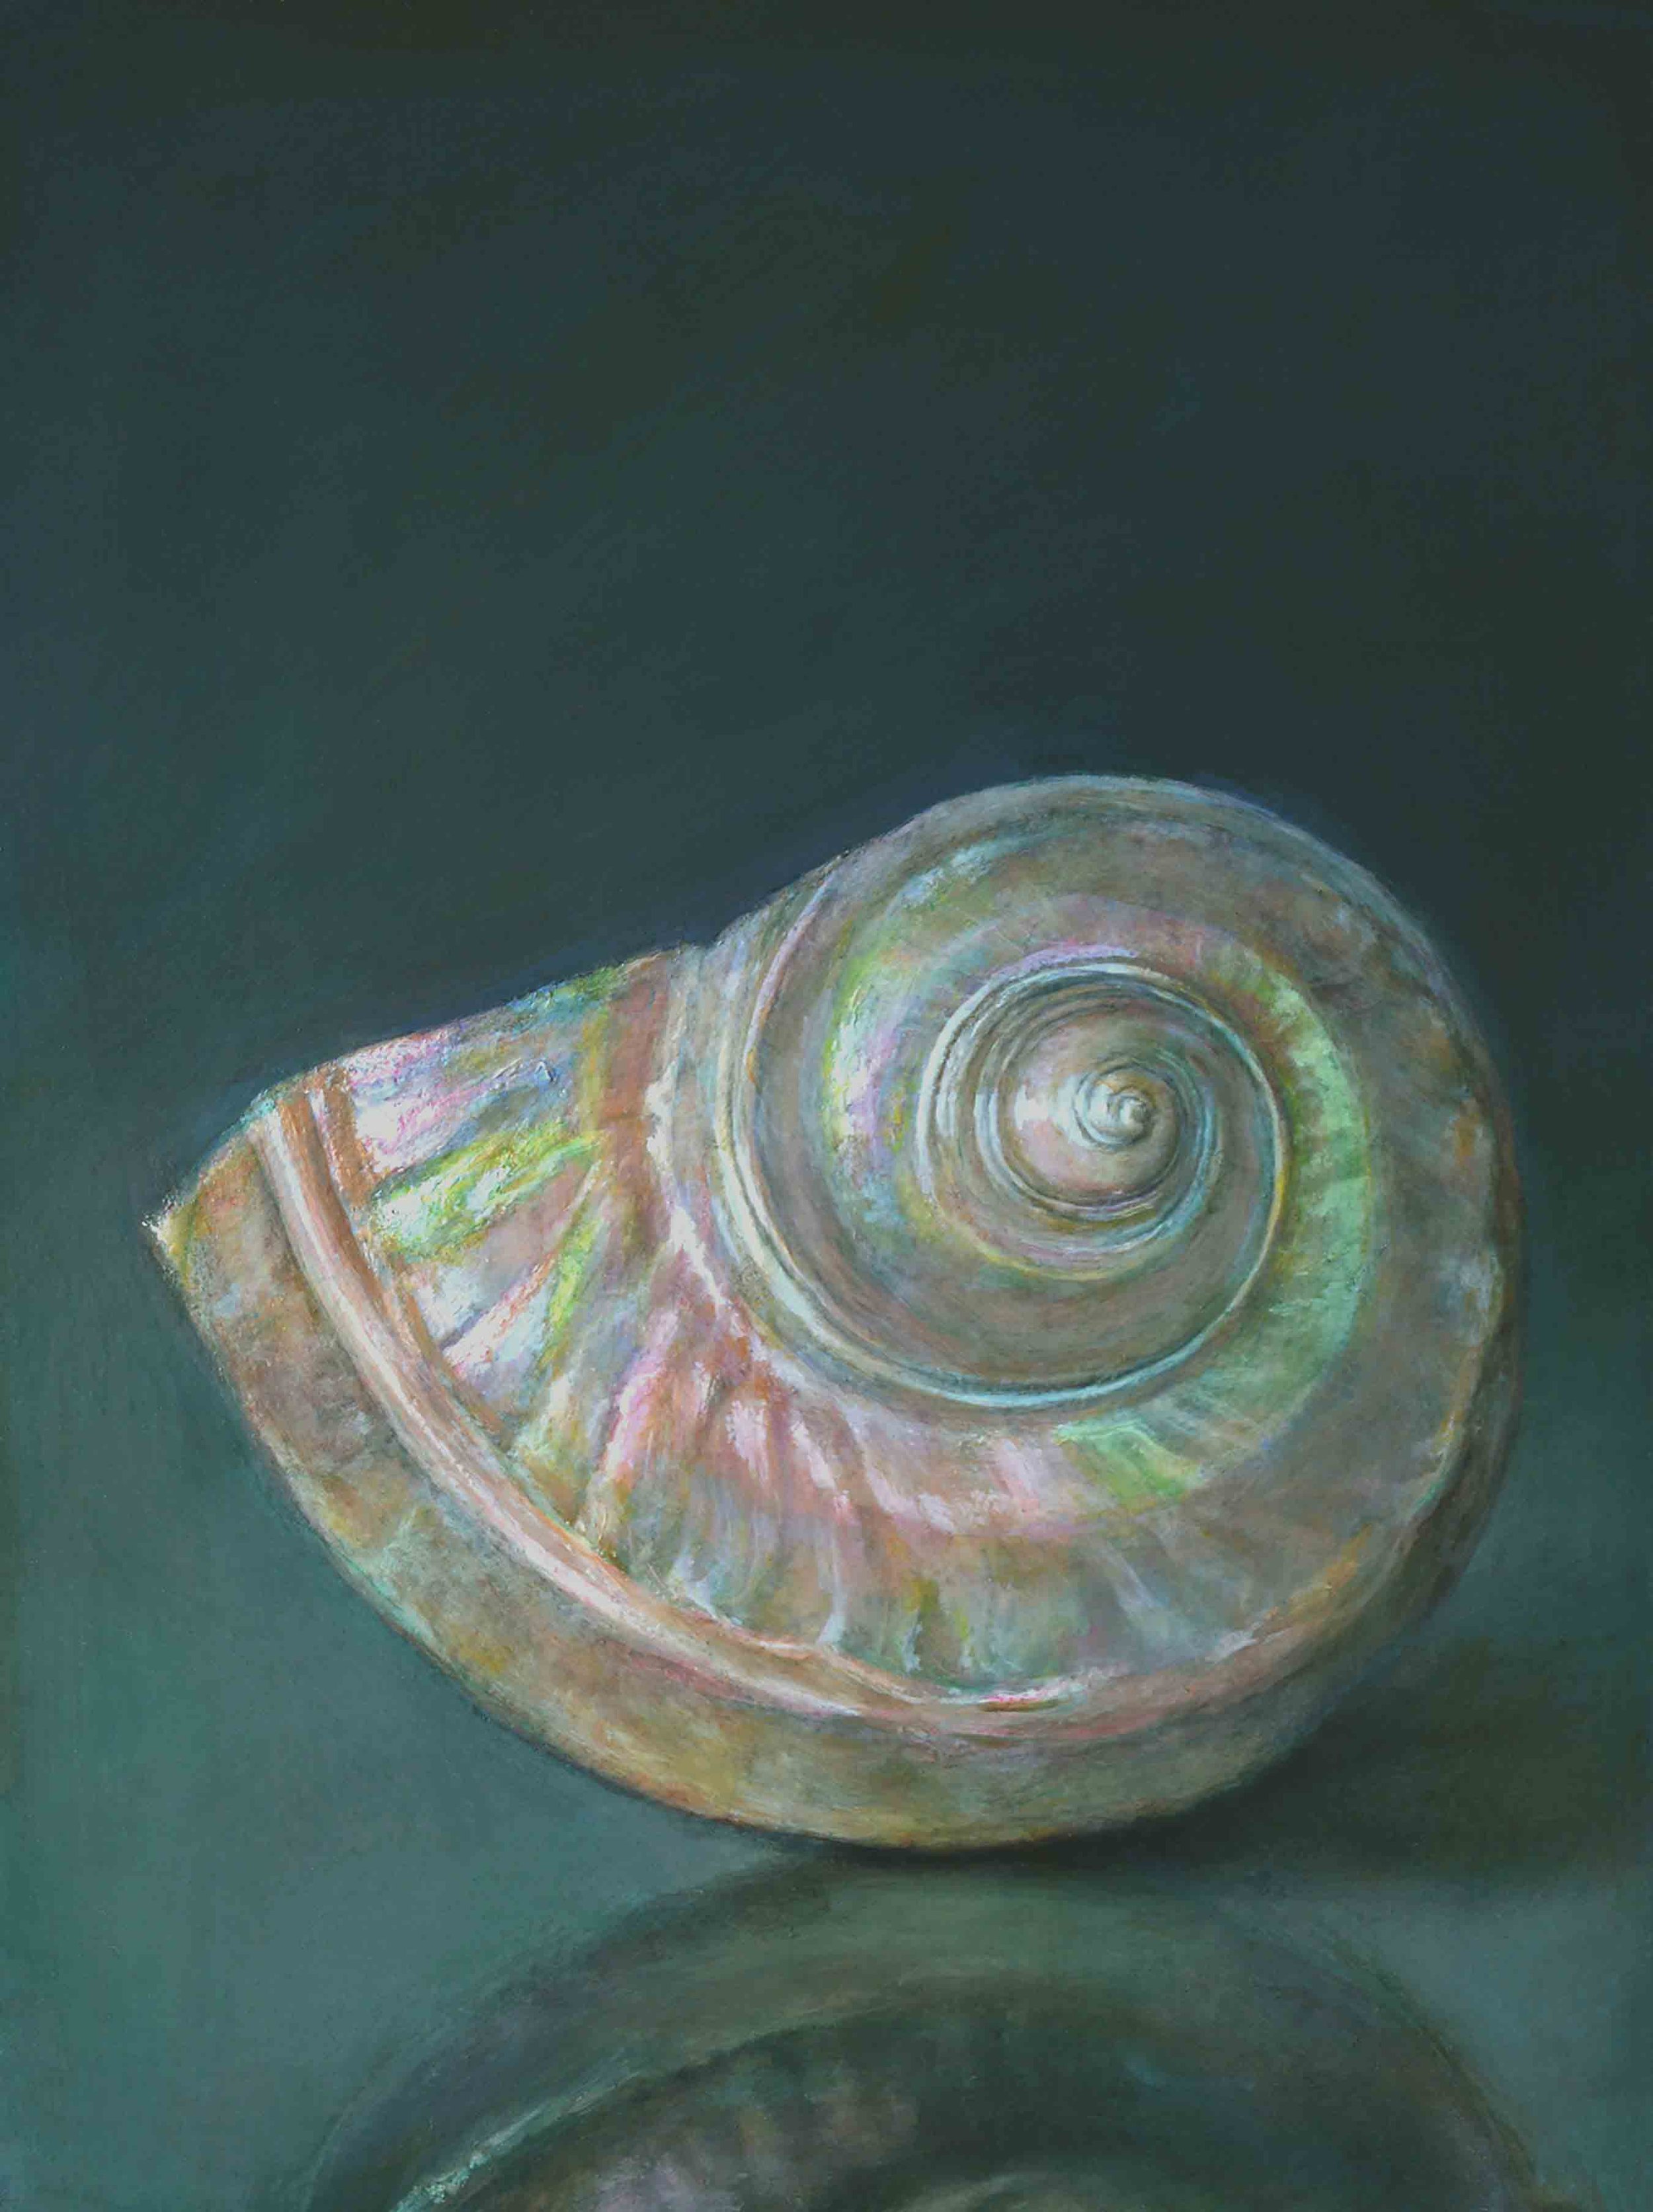 Mother-of-Pearl shell